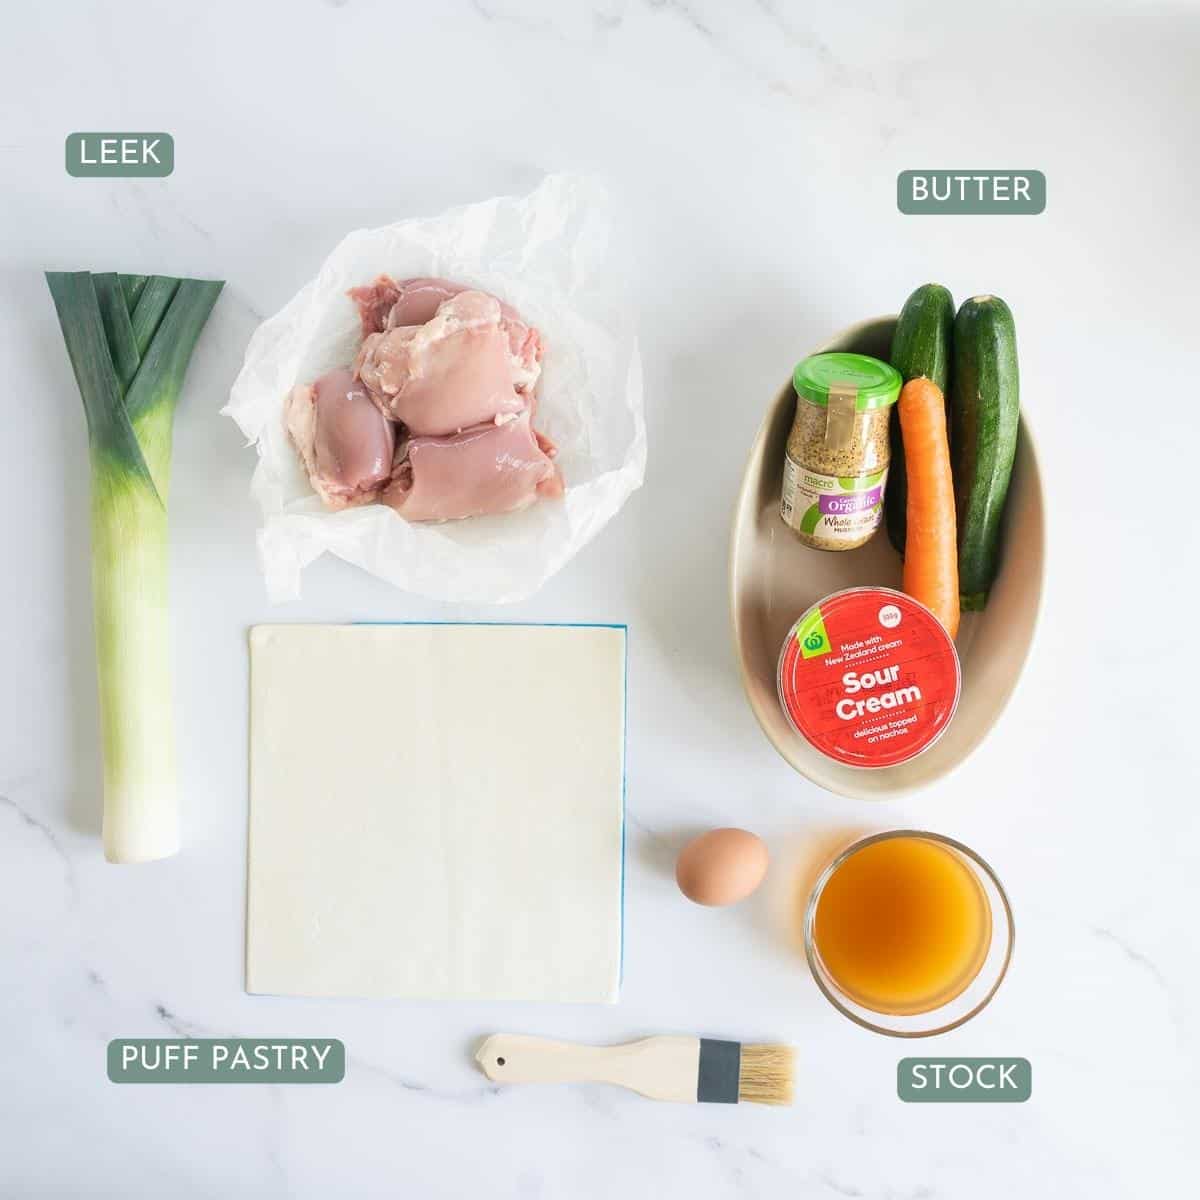 The ingredients to make chicken leek pie laid out on bench top with text overlay.